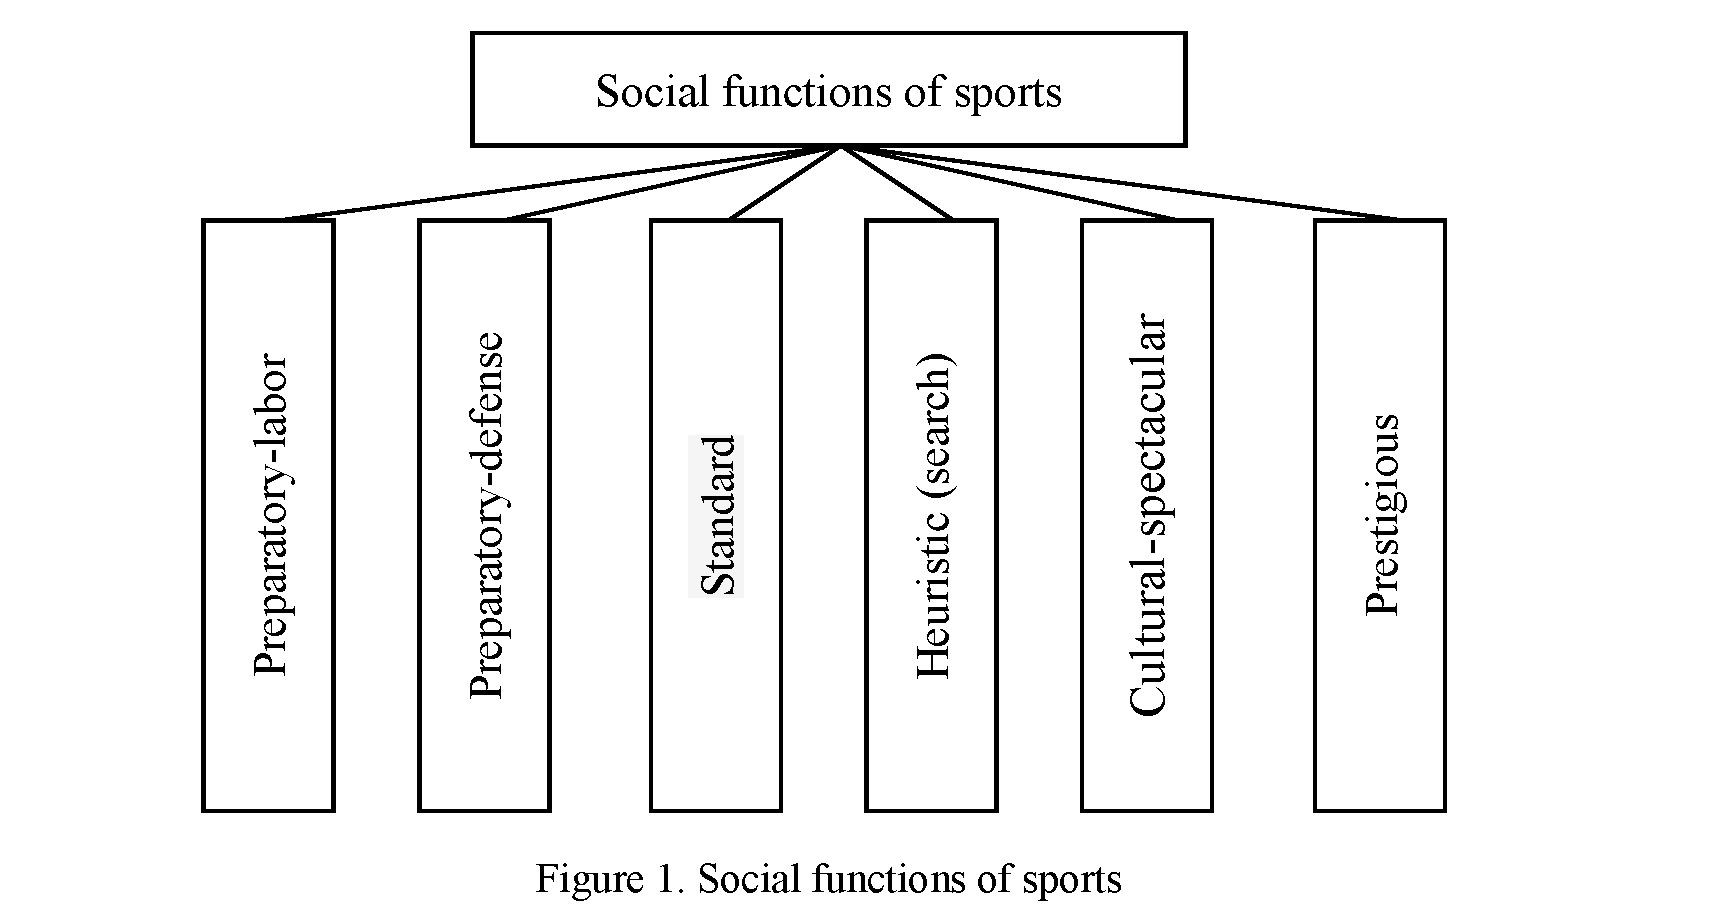 Functions of sport that increase its social significance